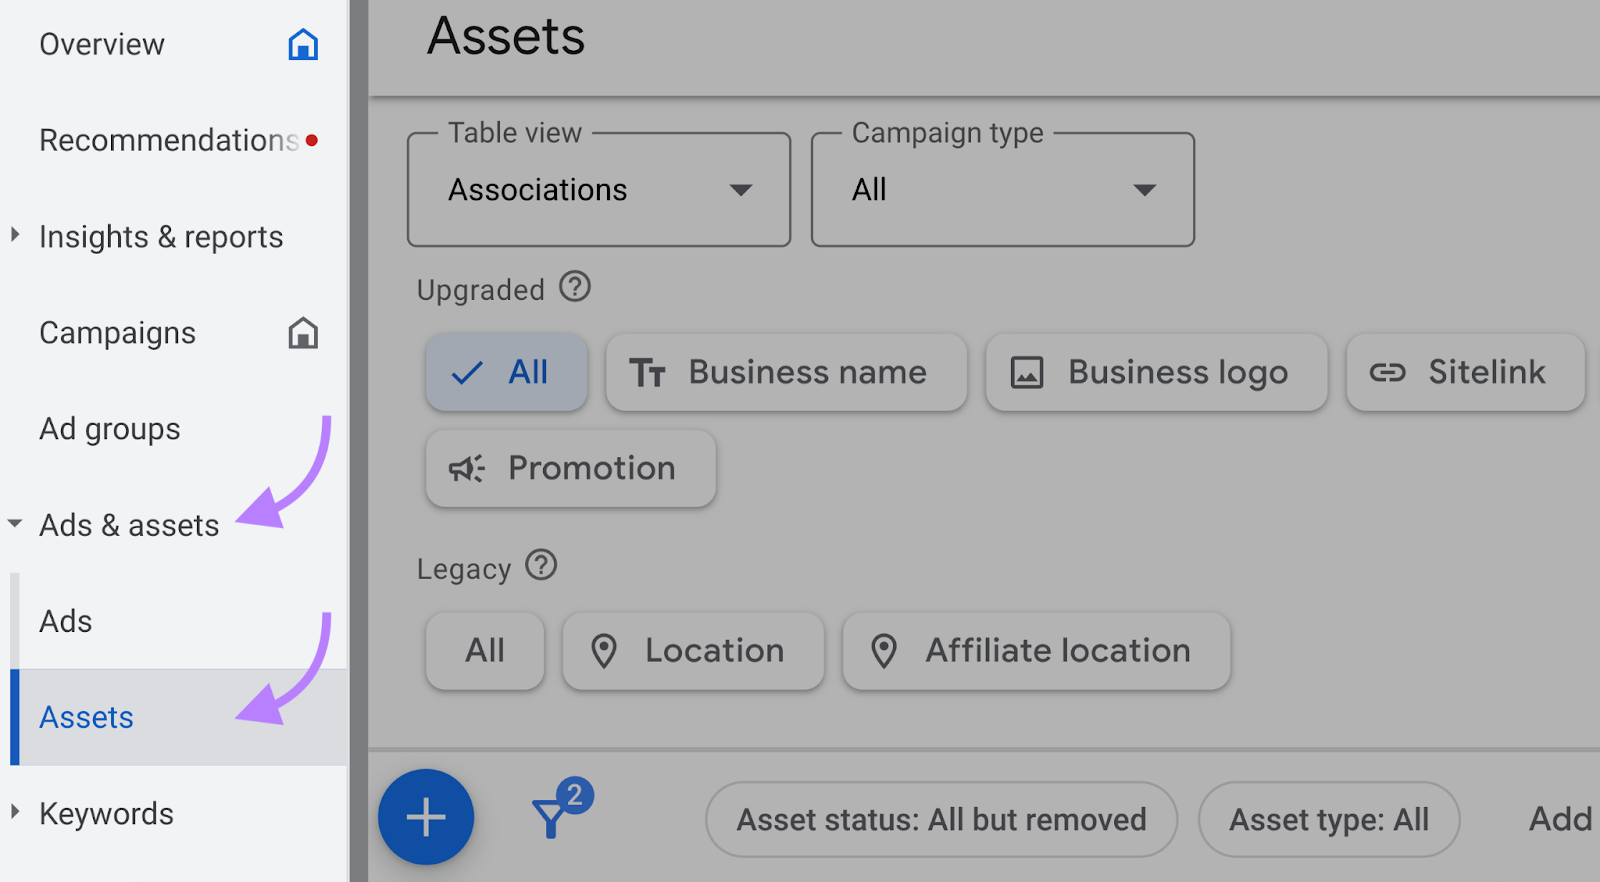 navigation to “Ads & assets” and “Assets” buttons on the left side menu